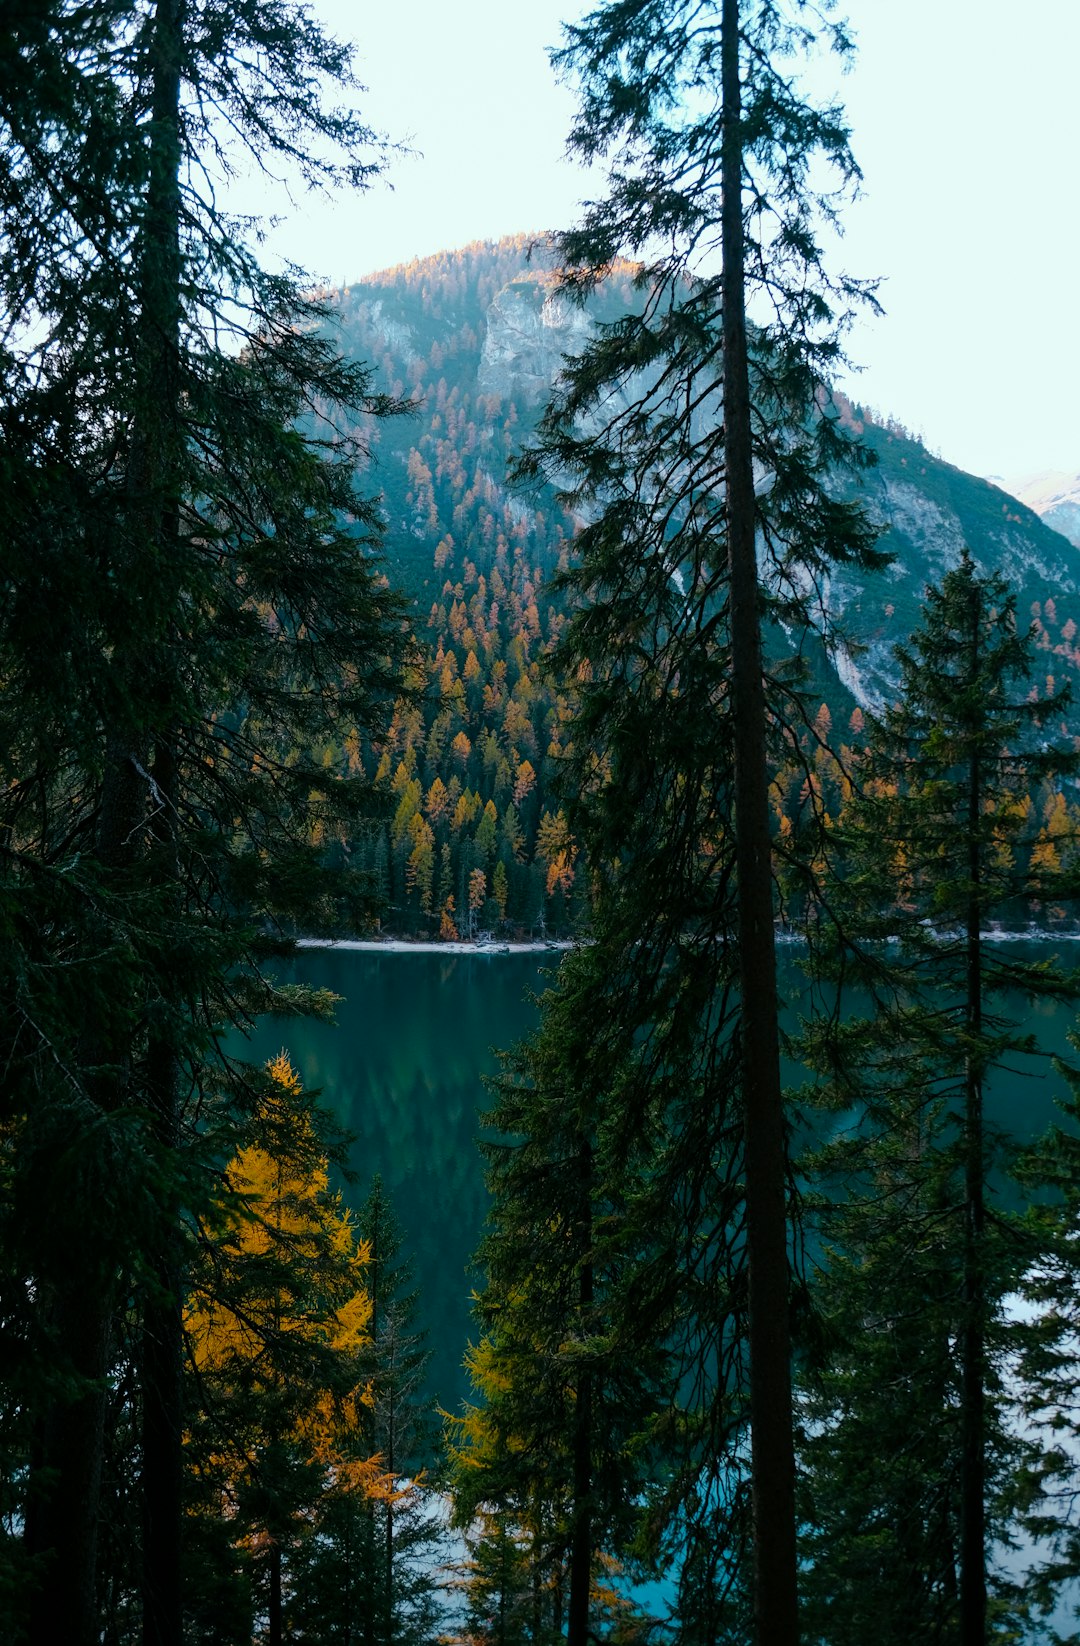 Tropical and subtropical coniferous forests photo spot Lago di Braies San Martino In Badia